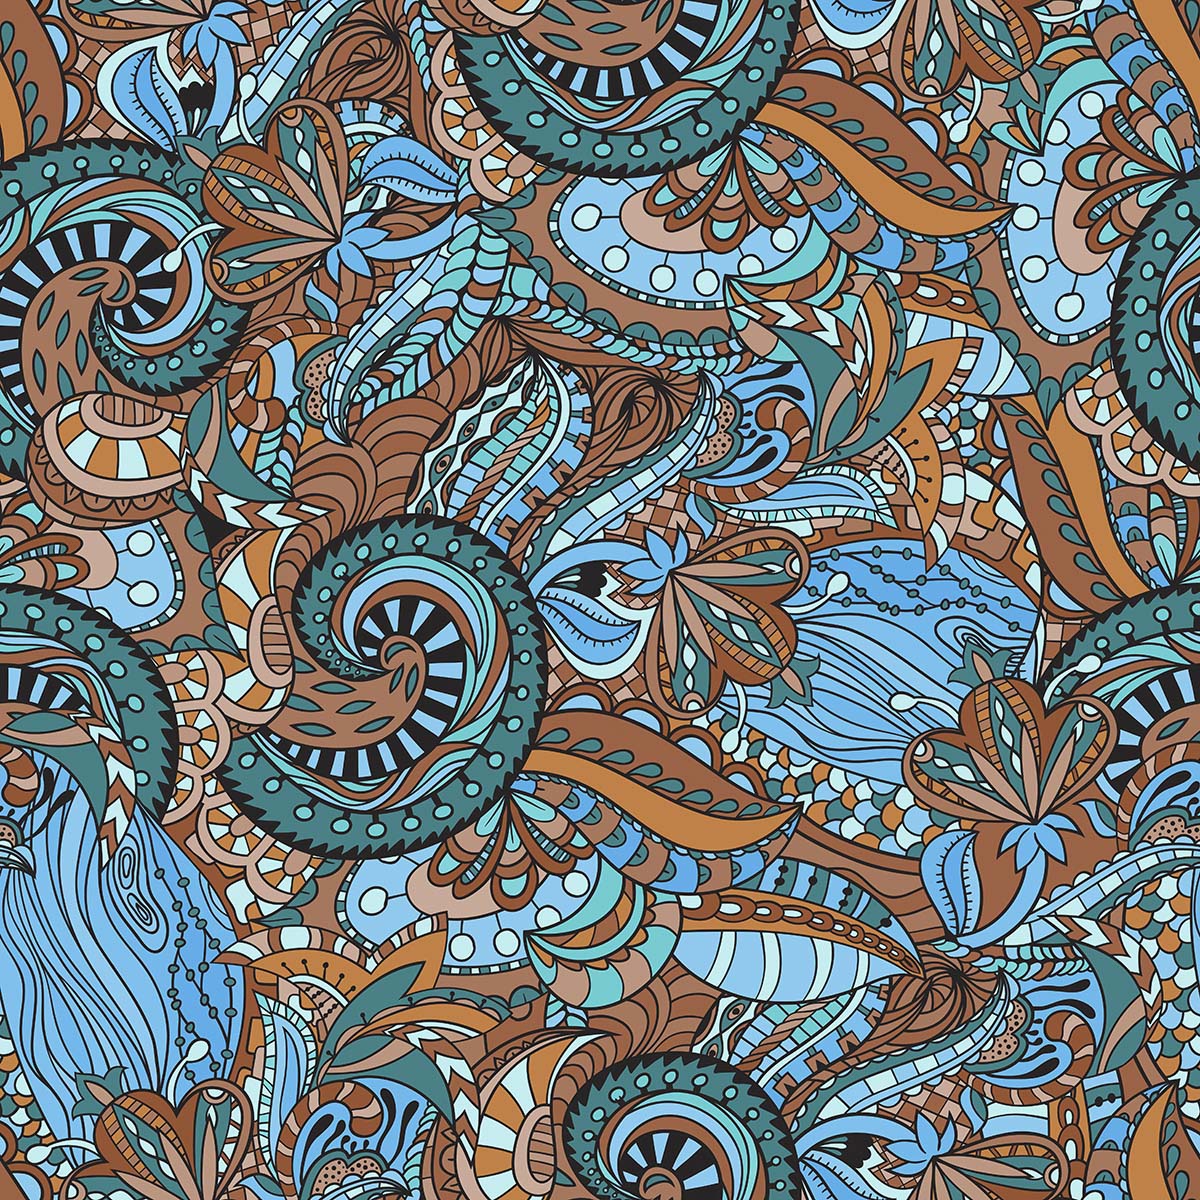 A pattern of blue and brown paisleys